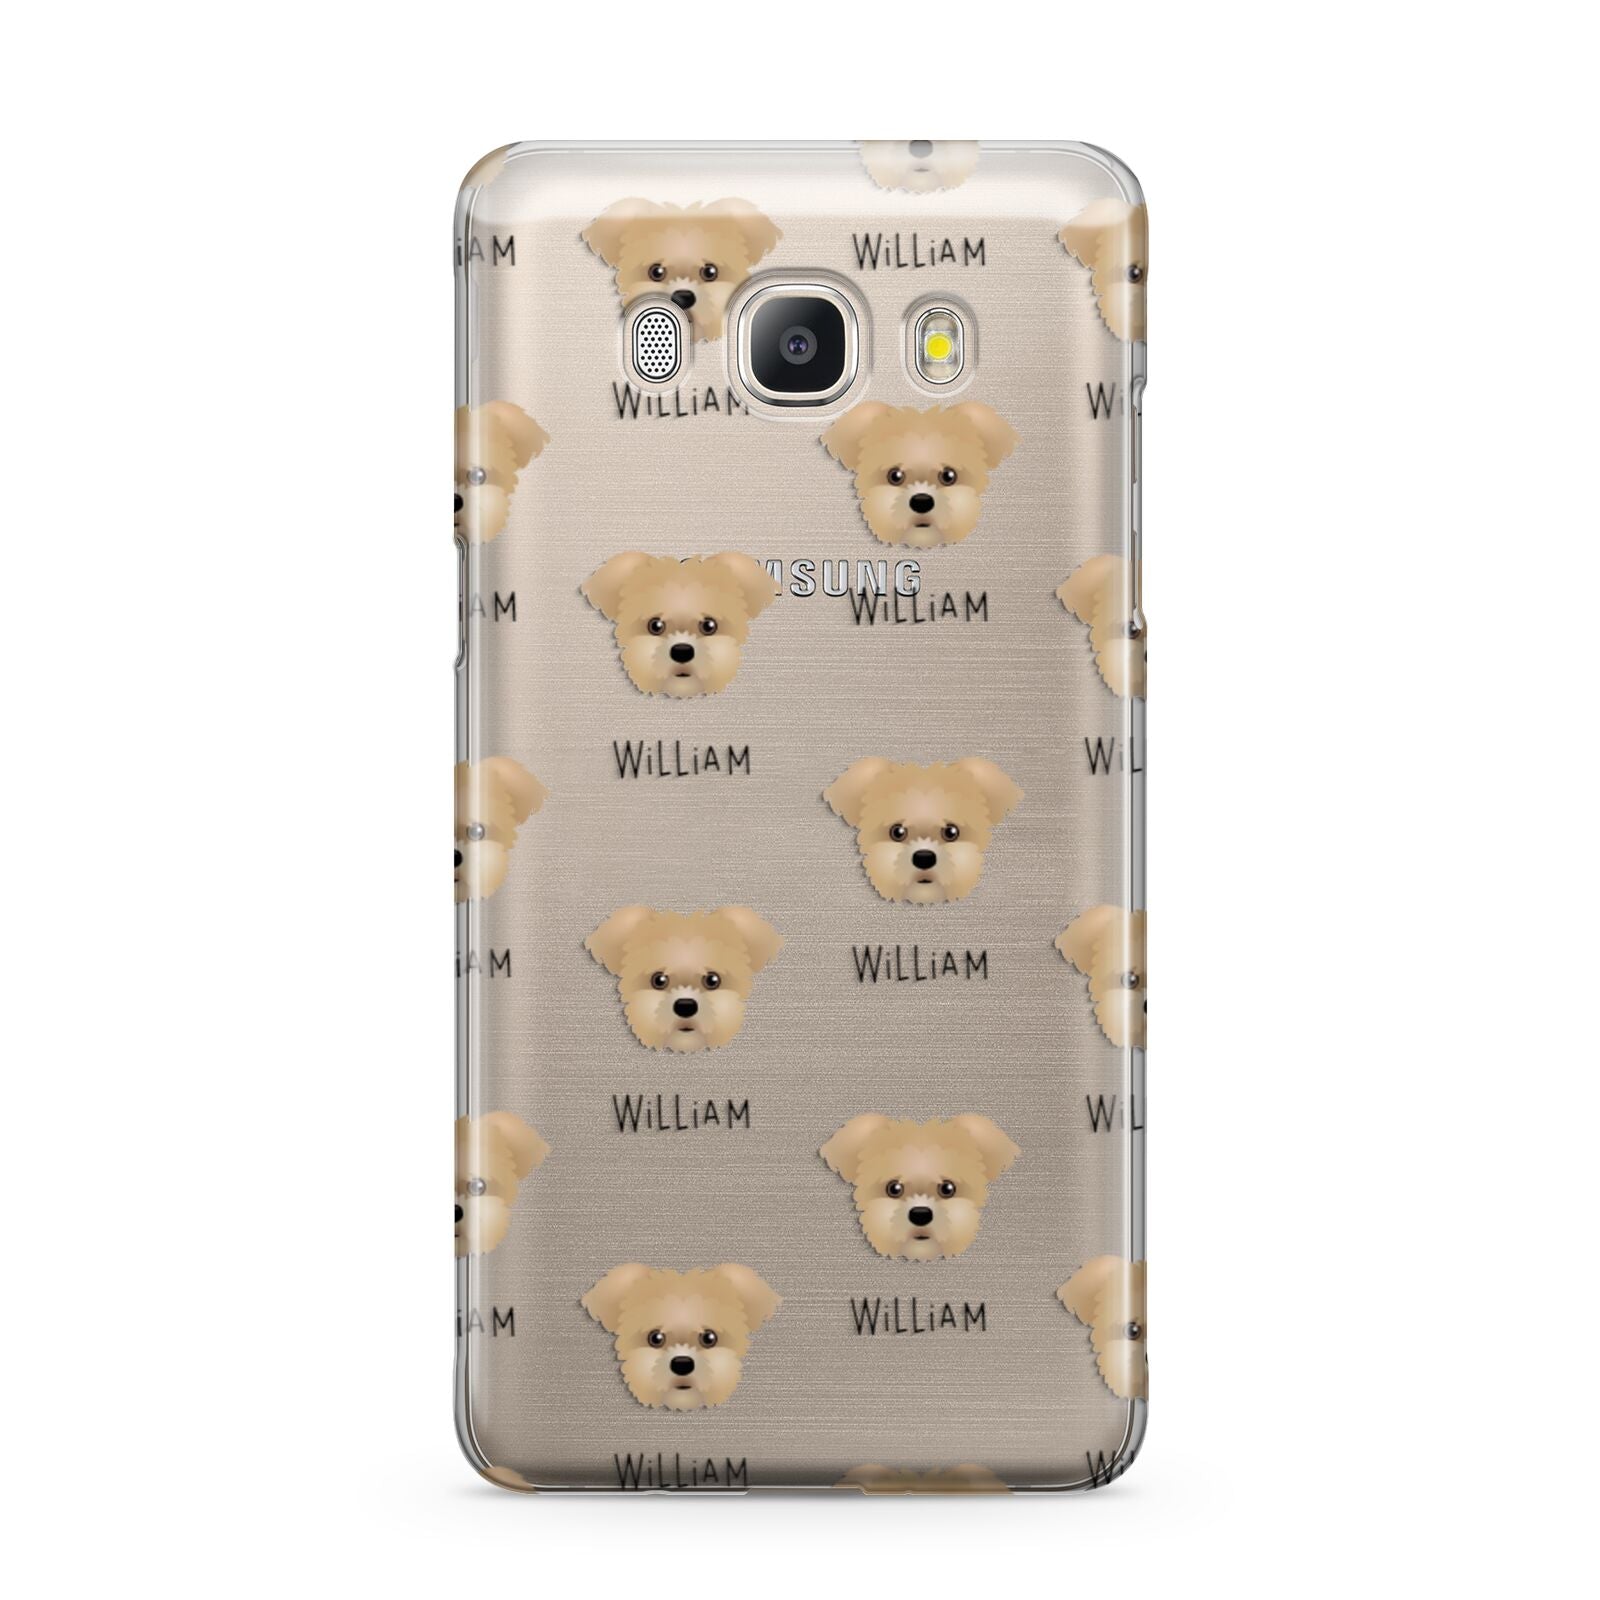 Morkie Icon with Name Samsung Galaxy J5 2016 Case